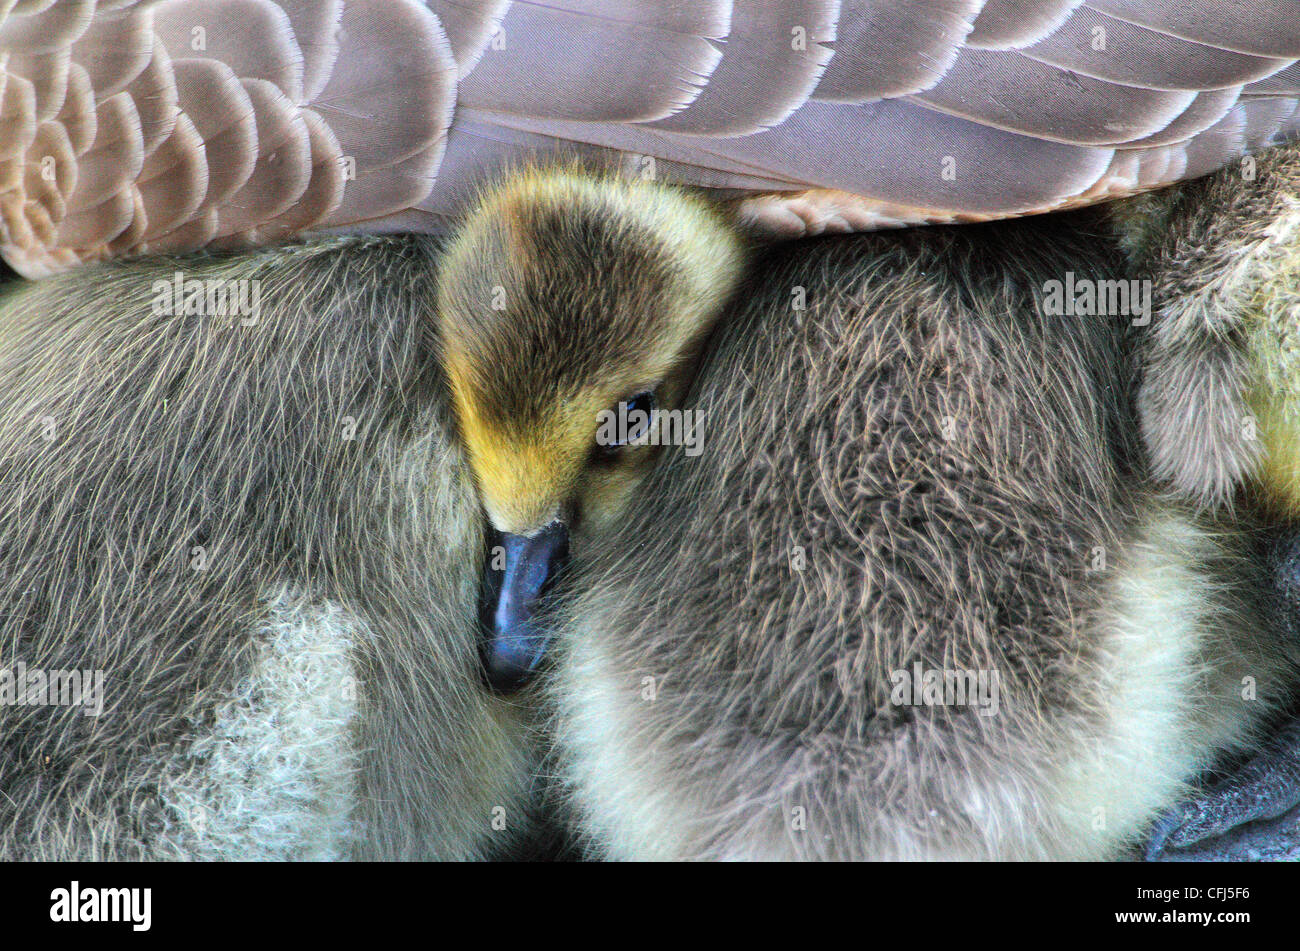 Canada goose with ducklings, Oslo, Norway Stock Photo